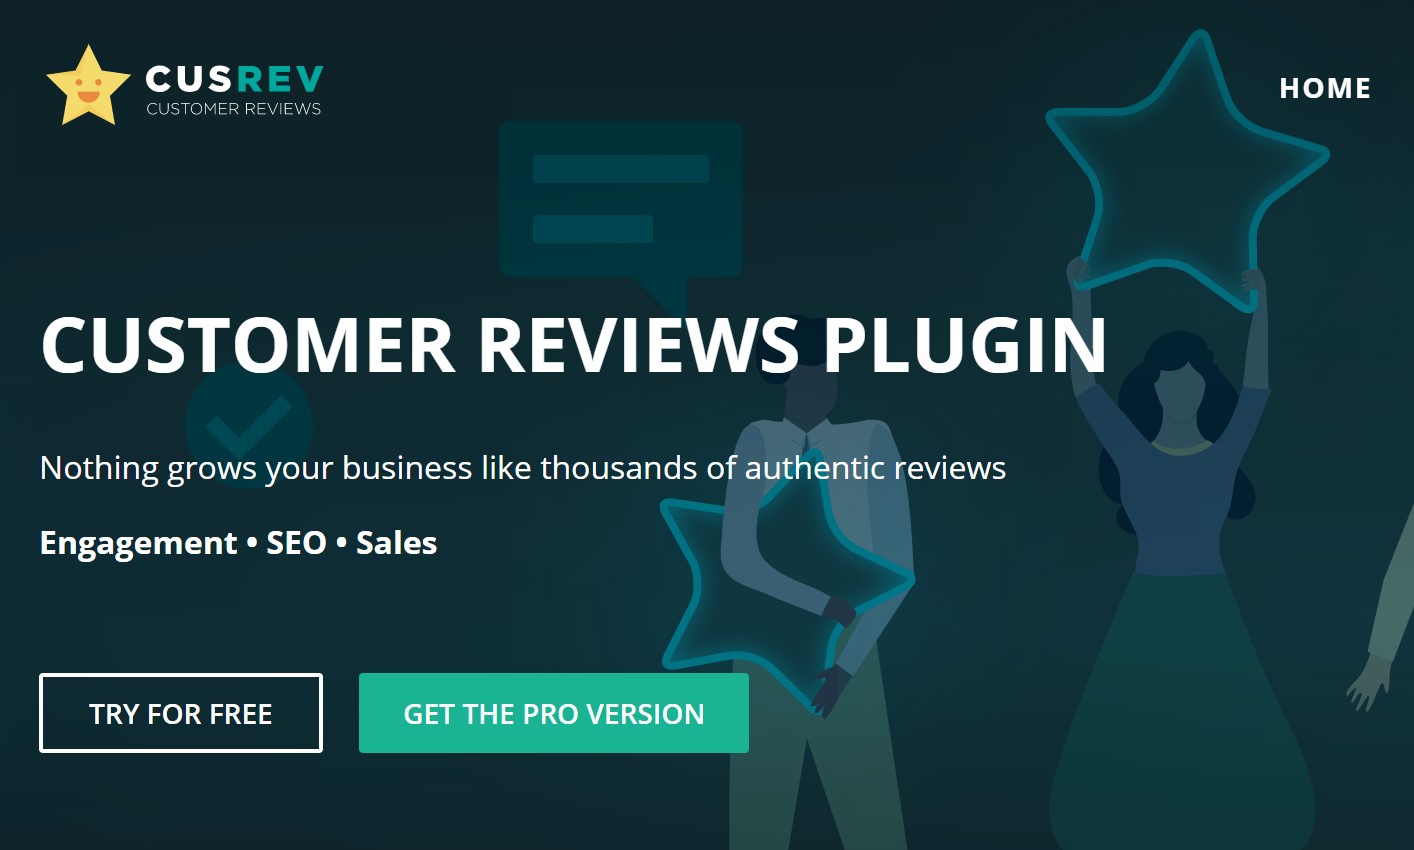 Customer Reviews for WooCommerce Pro 5.24.0 – 5.8.1 by cusrev